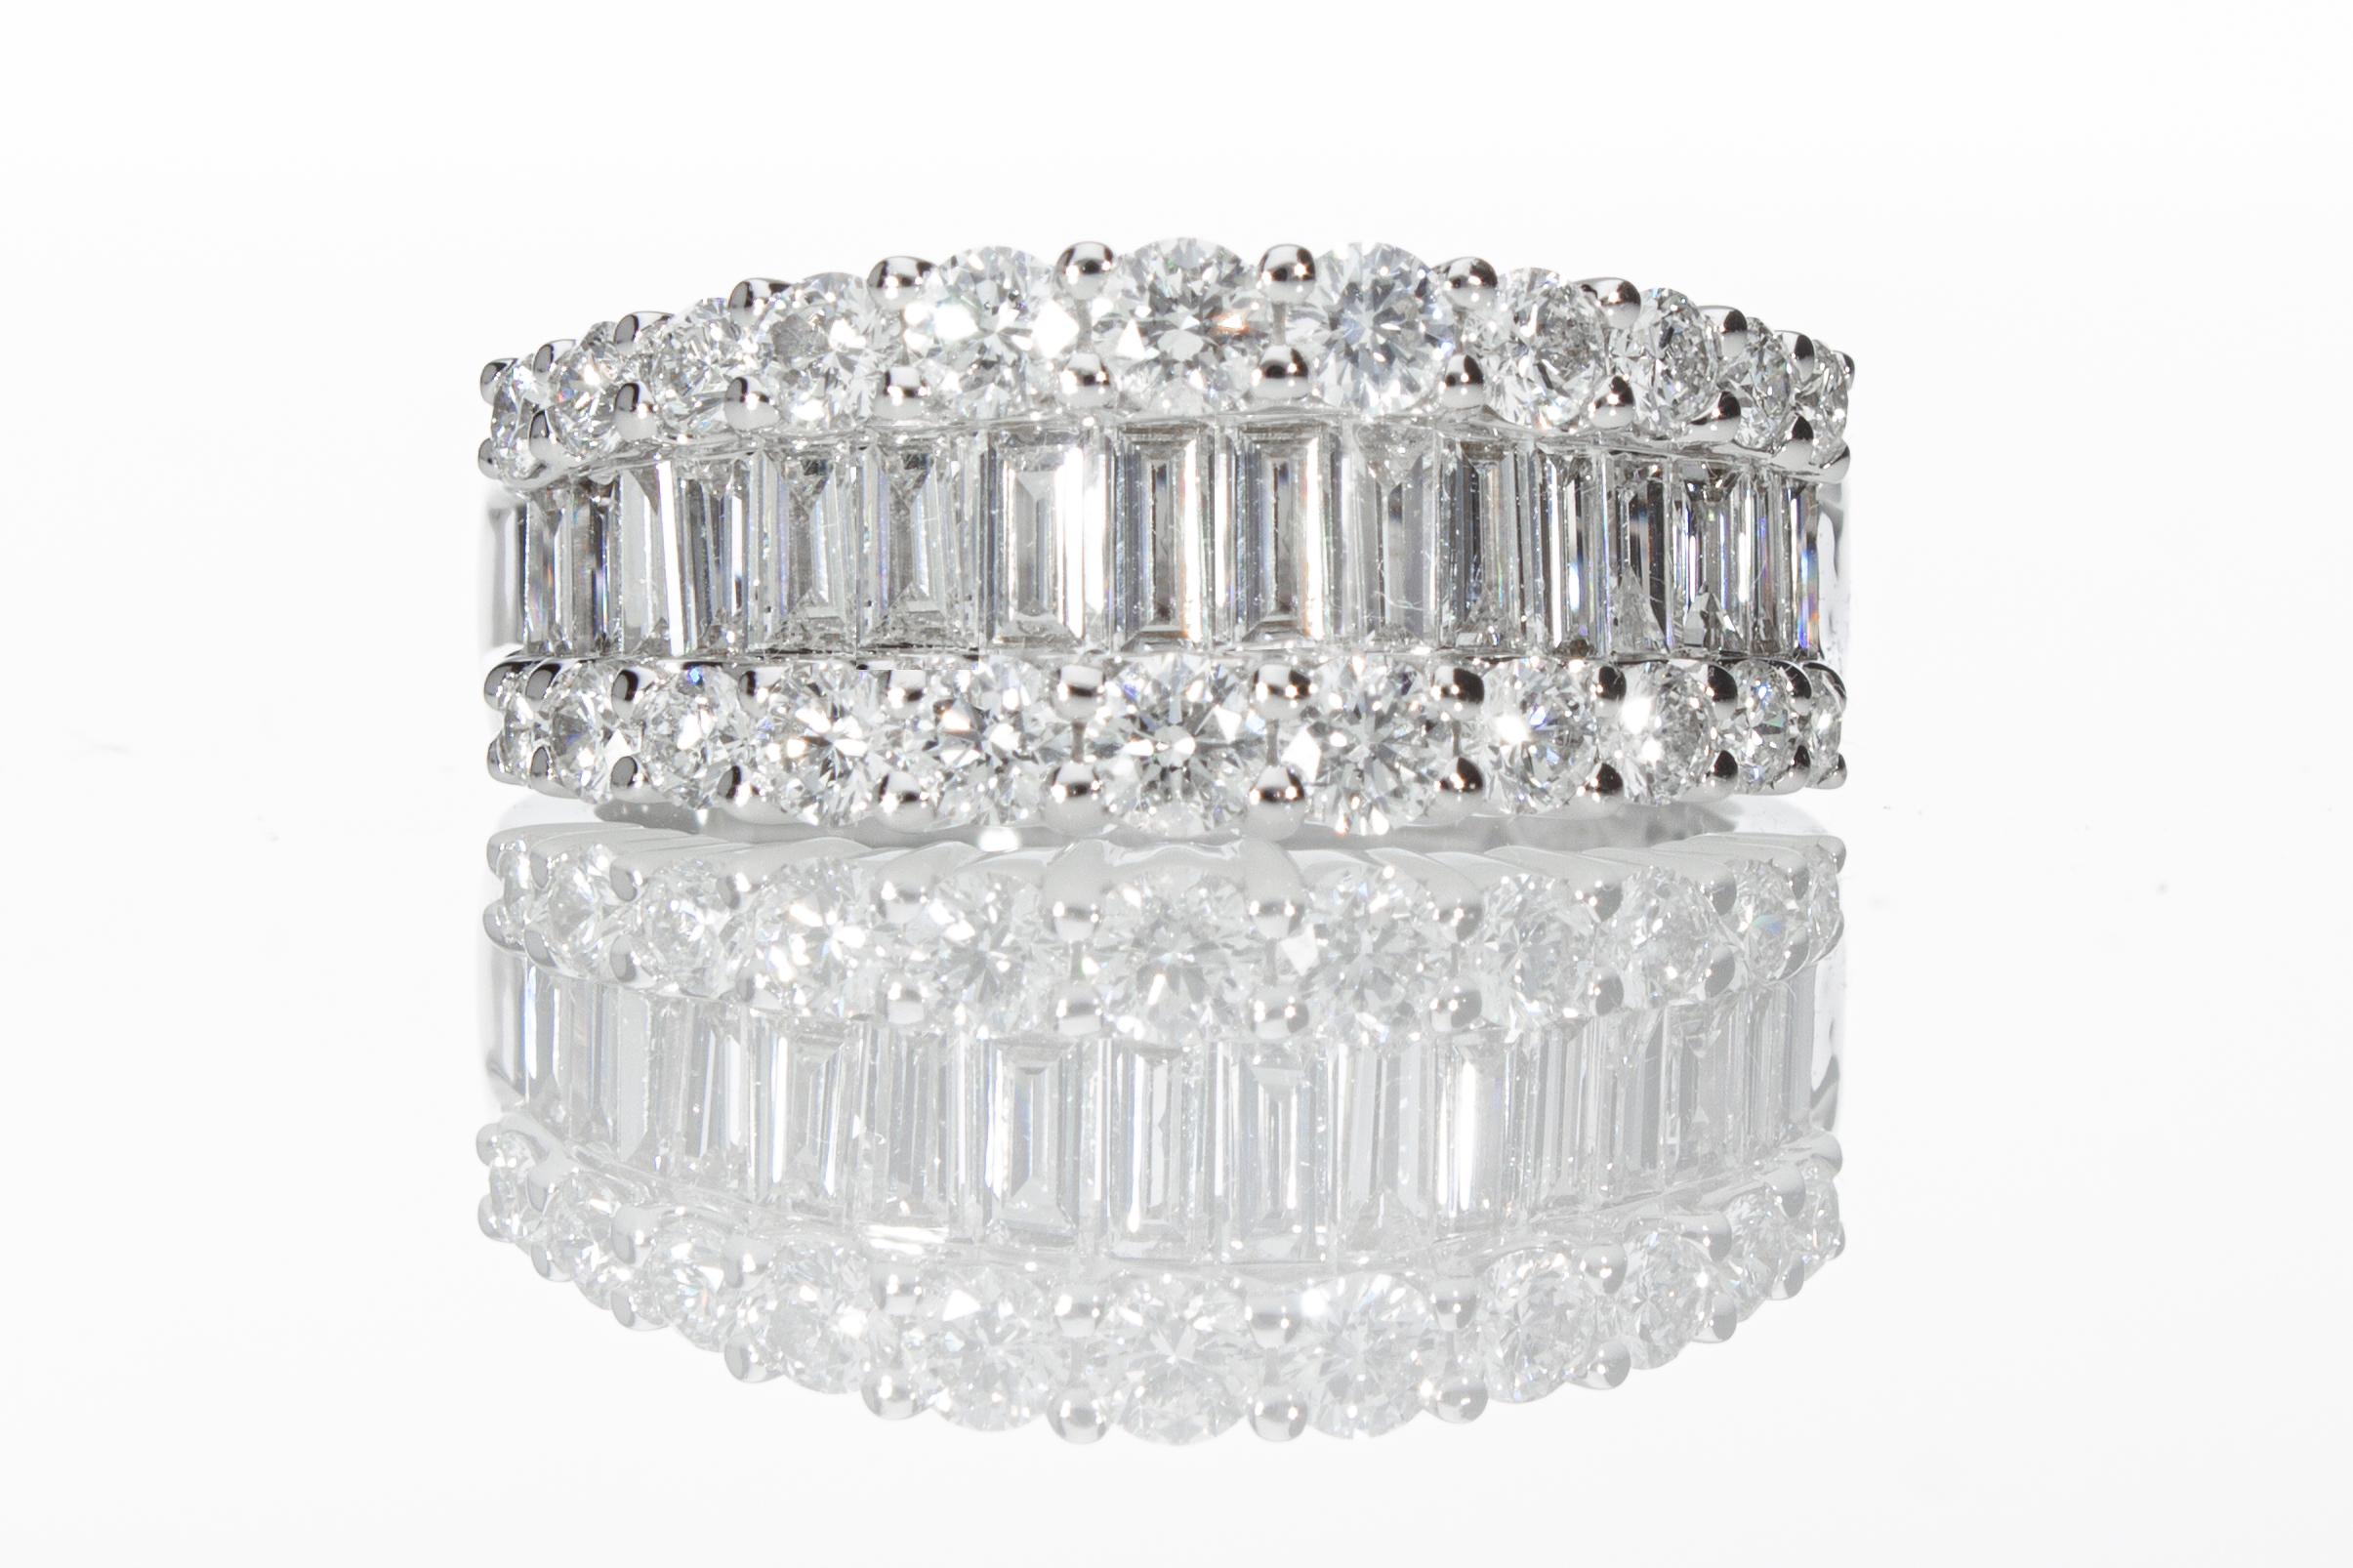 The ring is a graduated band model with 16 baguette-cut diamonds and 22 brilliant-cut diamonds. 
Total weight of the diamonds ct 1.60. 
The ring is in 18 Kt white gold.
Total Carat: ct 1.60
Total Weight: 5.4 grams
Number of Diamonds: N° 38

Ring